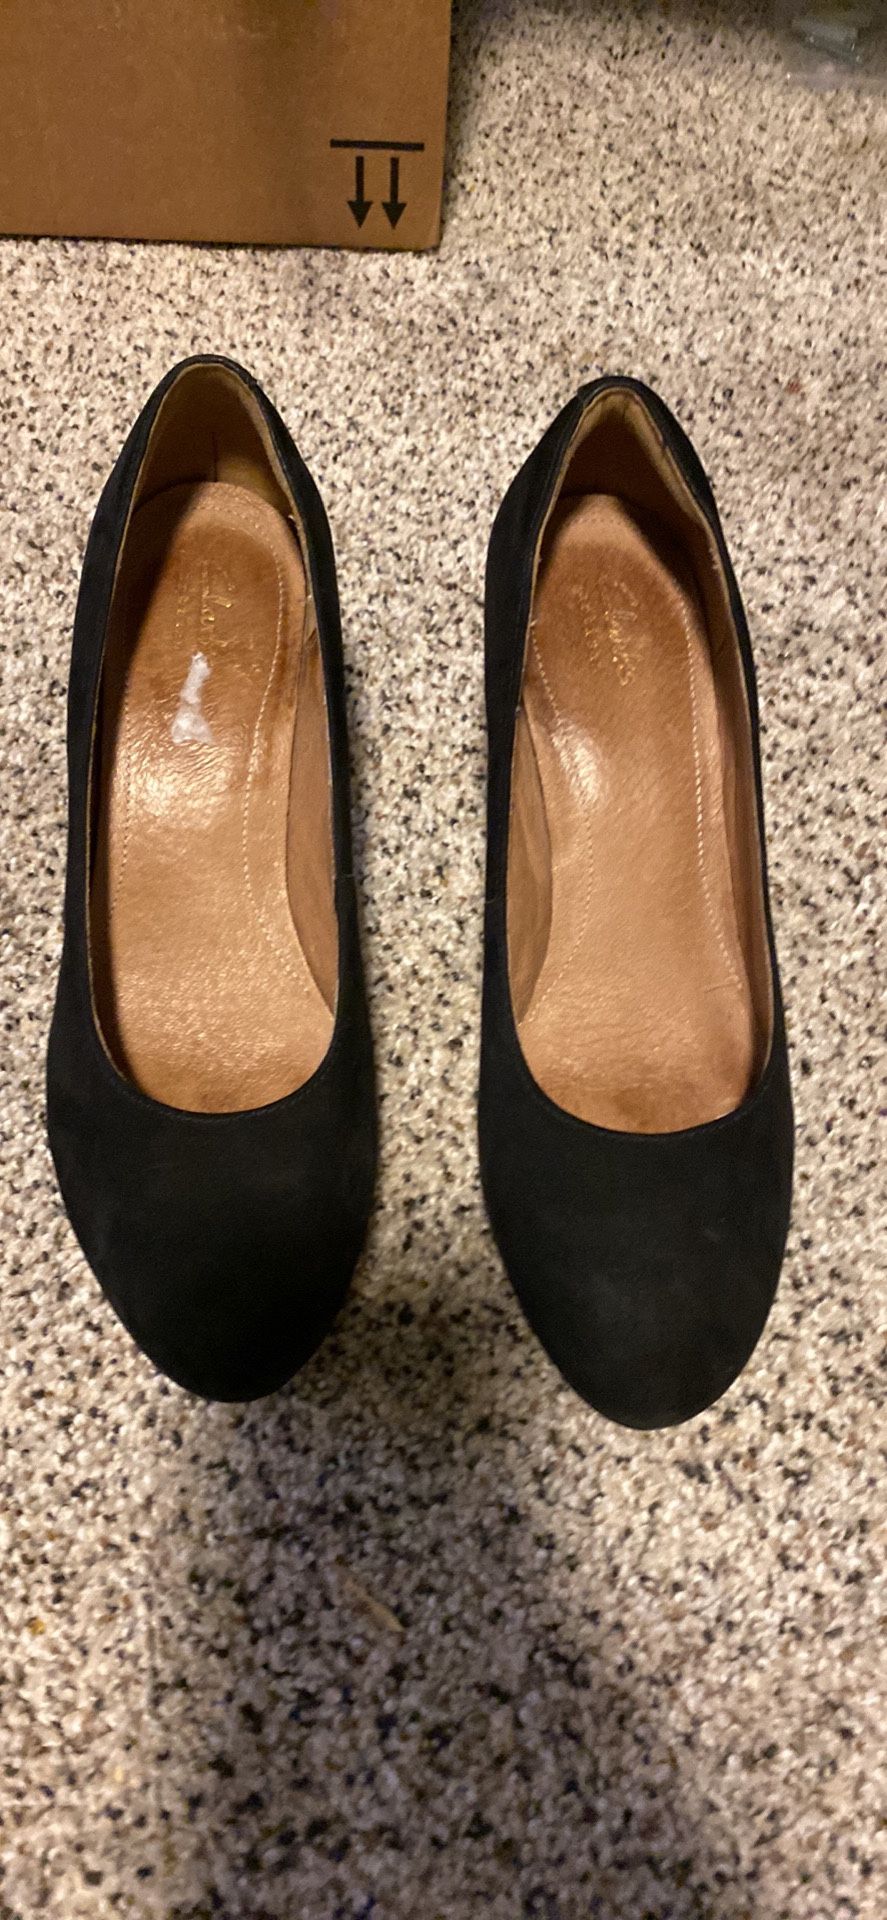 Clarks Leather Heels Size 8